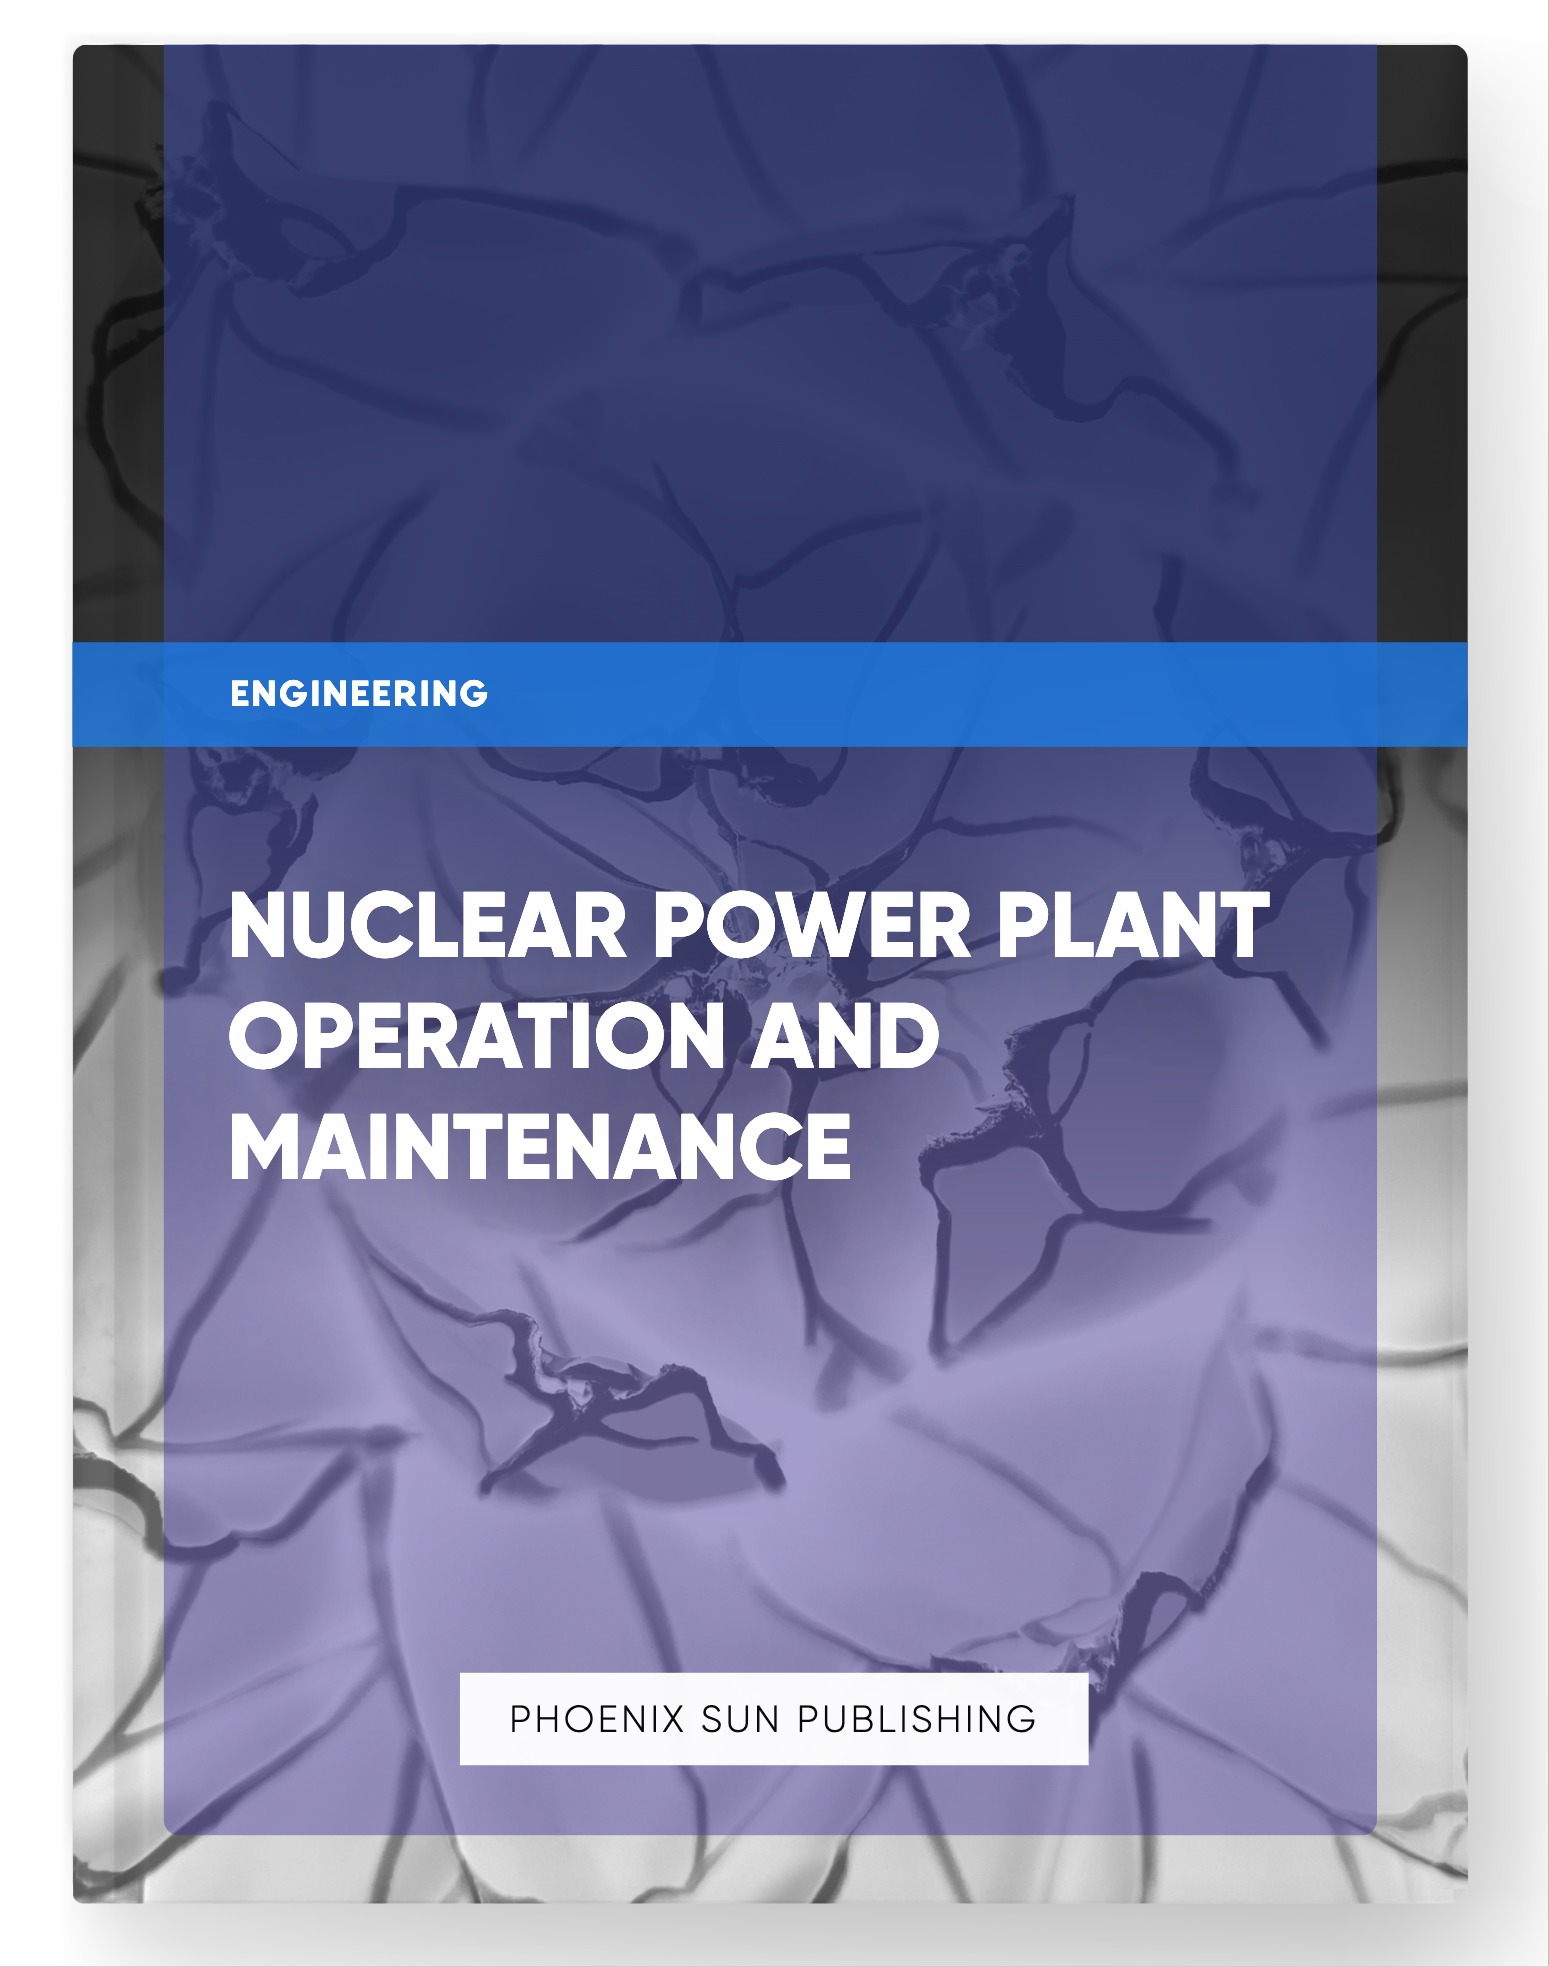 Nuclear Power Plant Operation and Maintenance